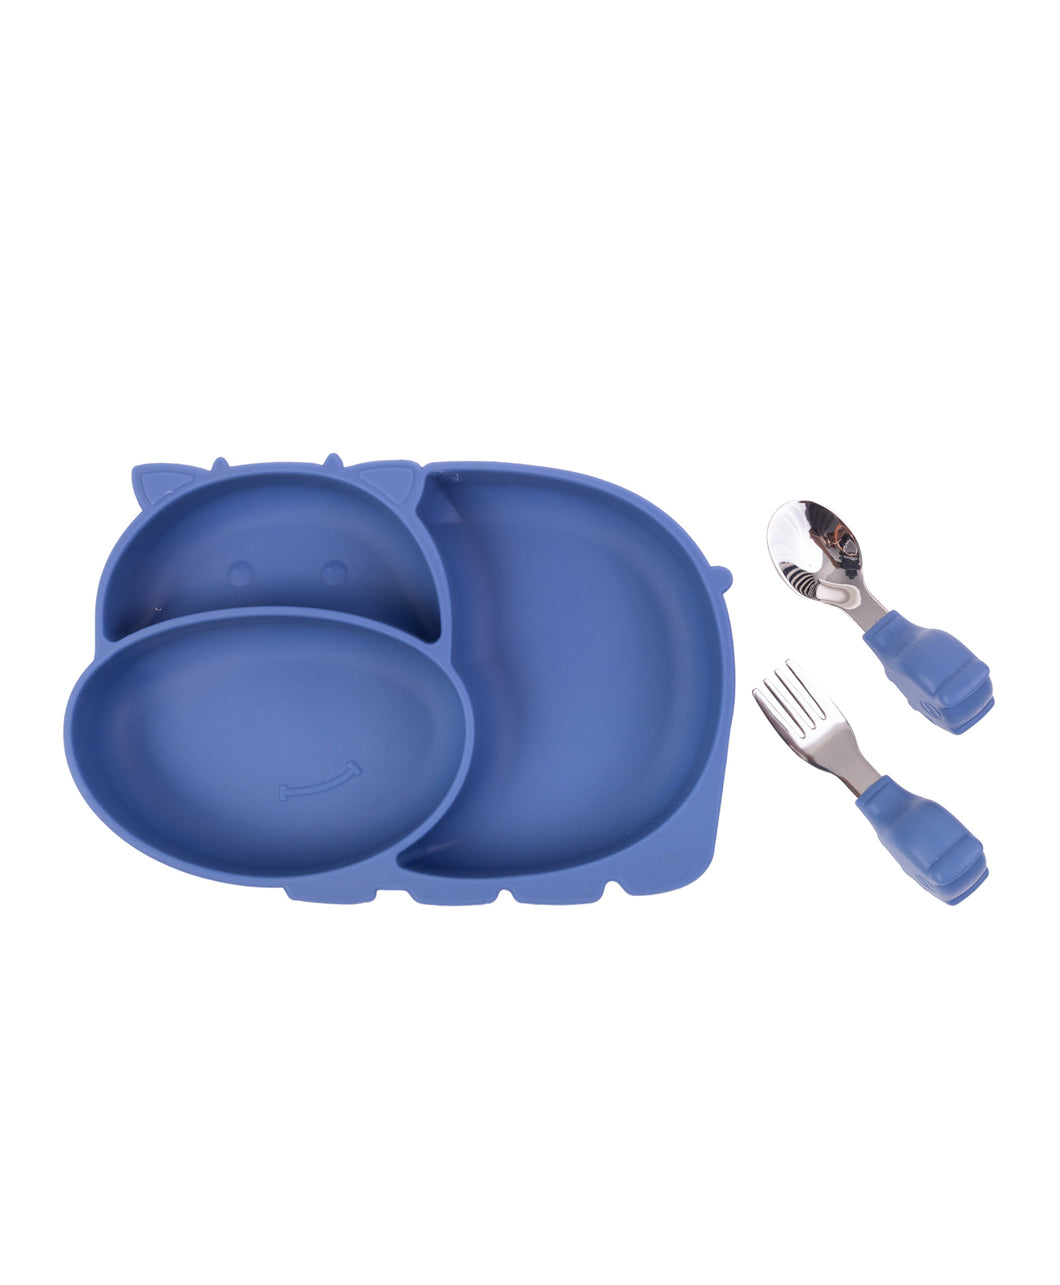 Kids Hippo plate with cutlery set Blue by Amini